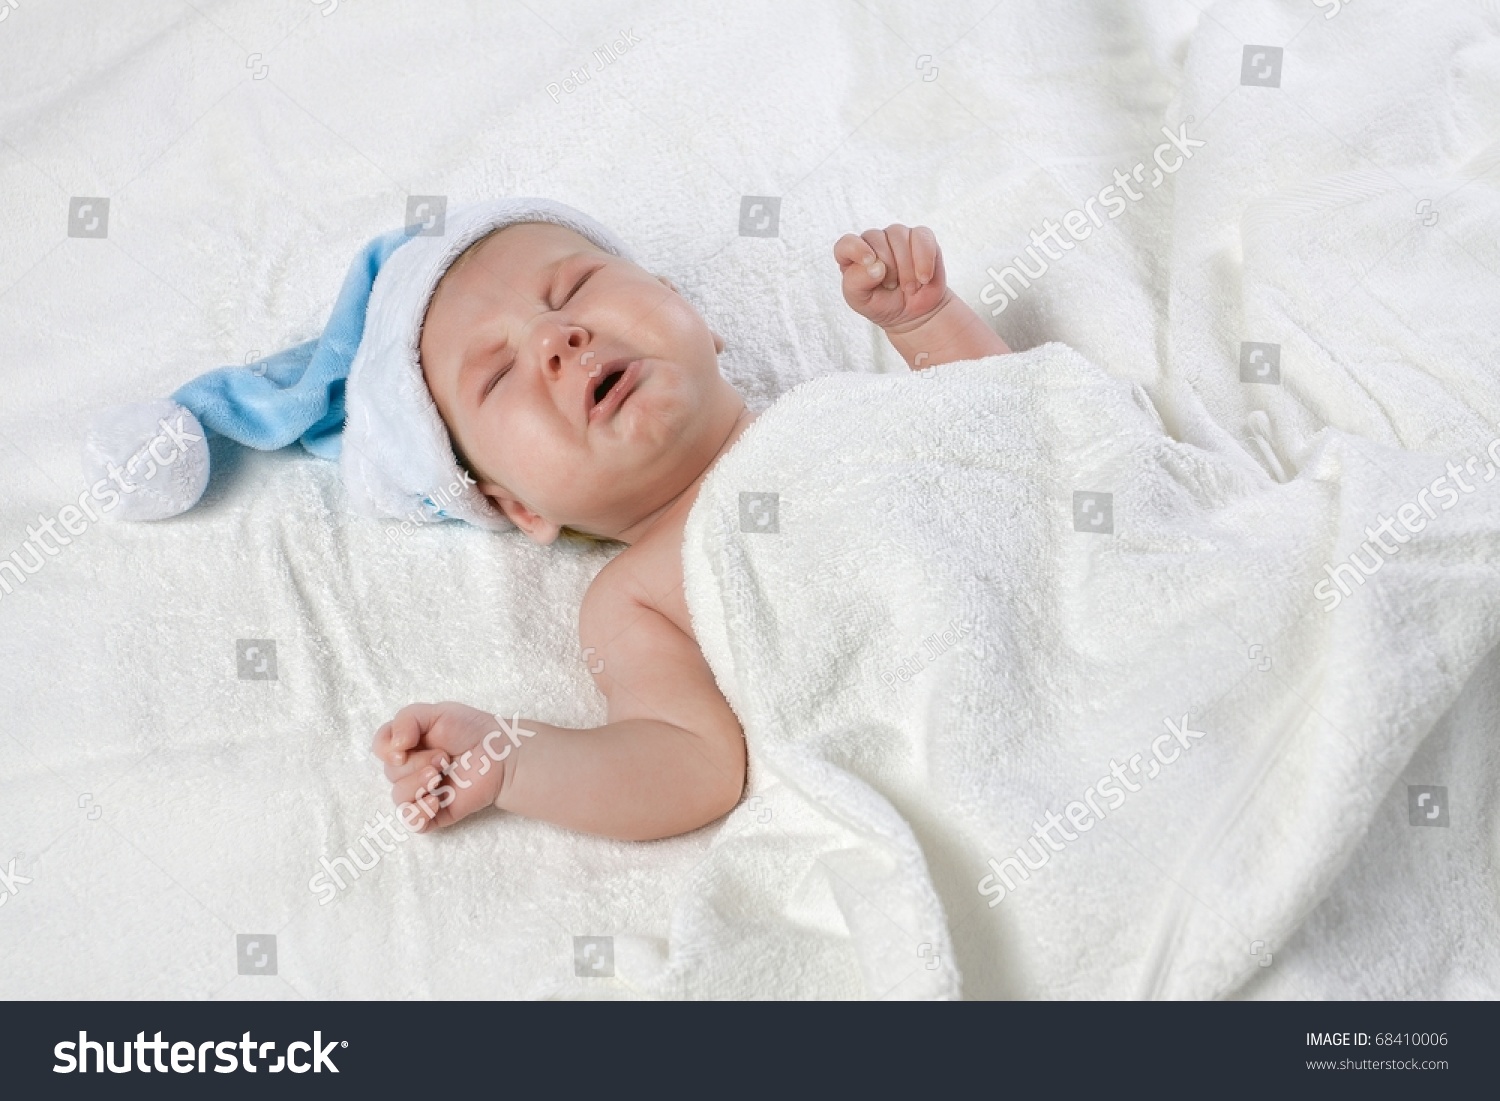 Crying baby with blue cap #68410006